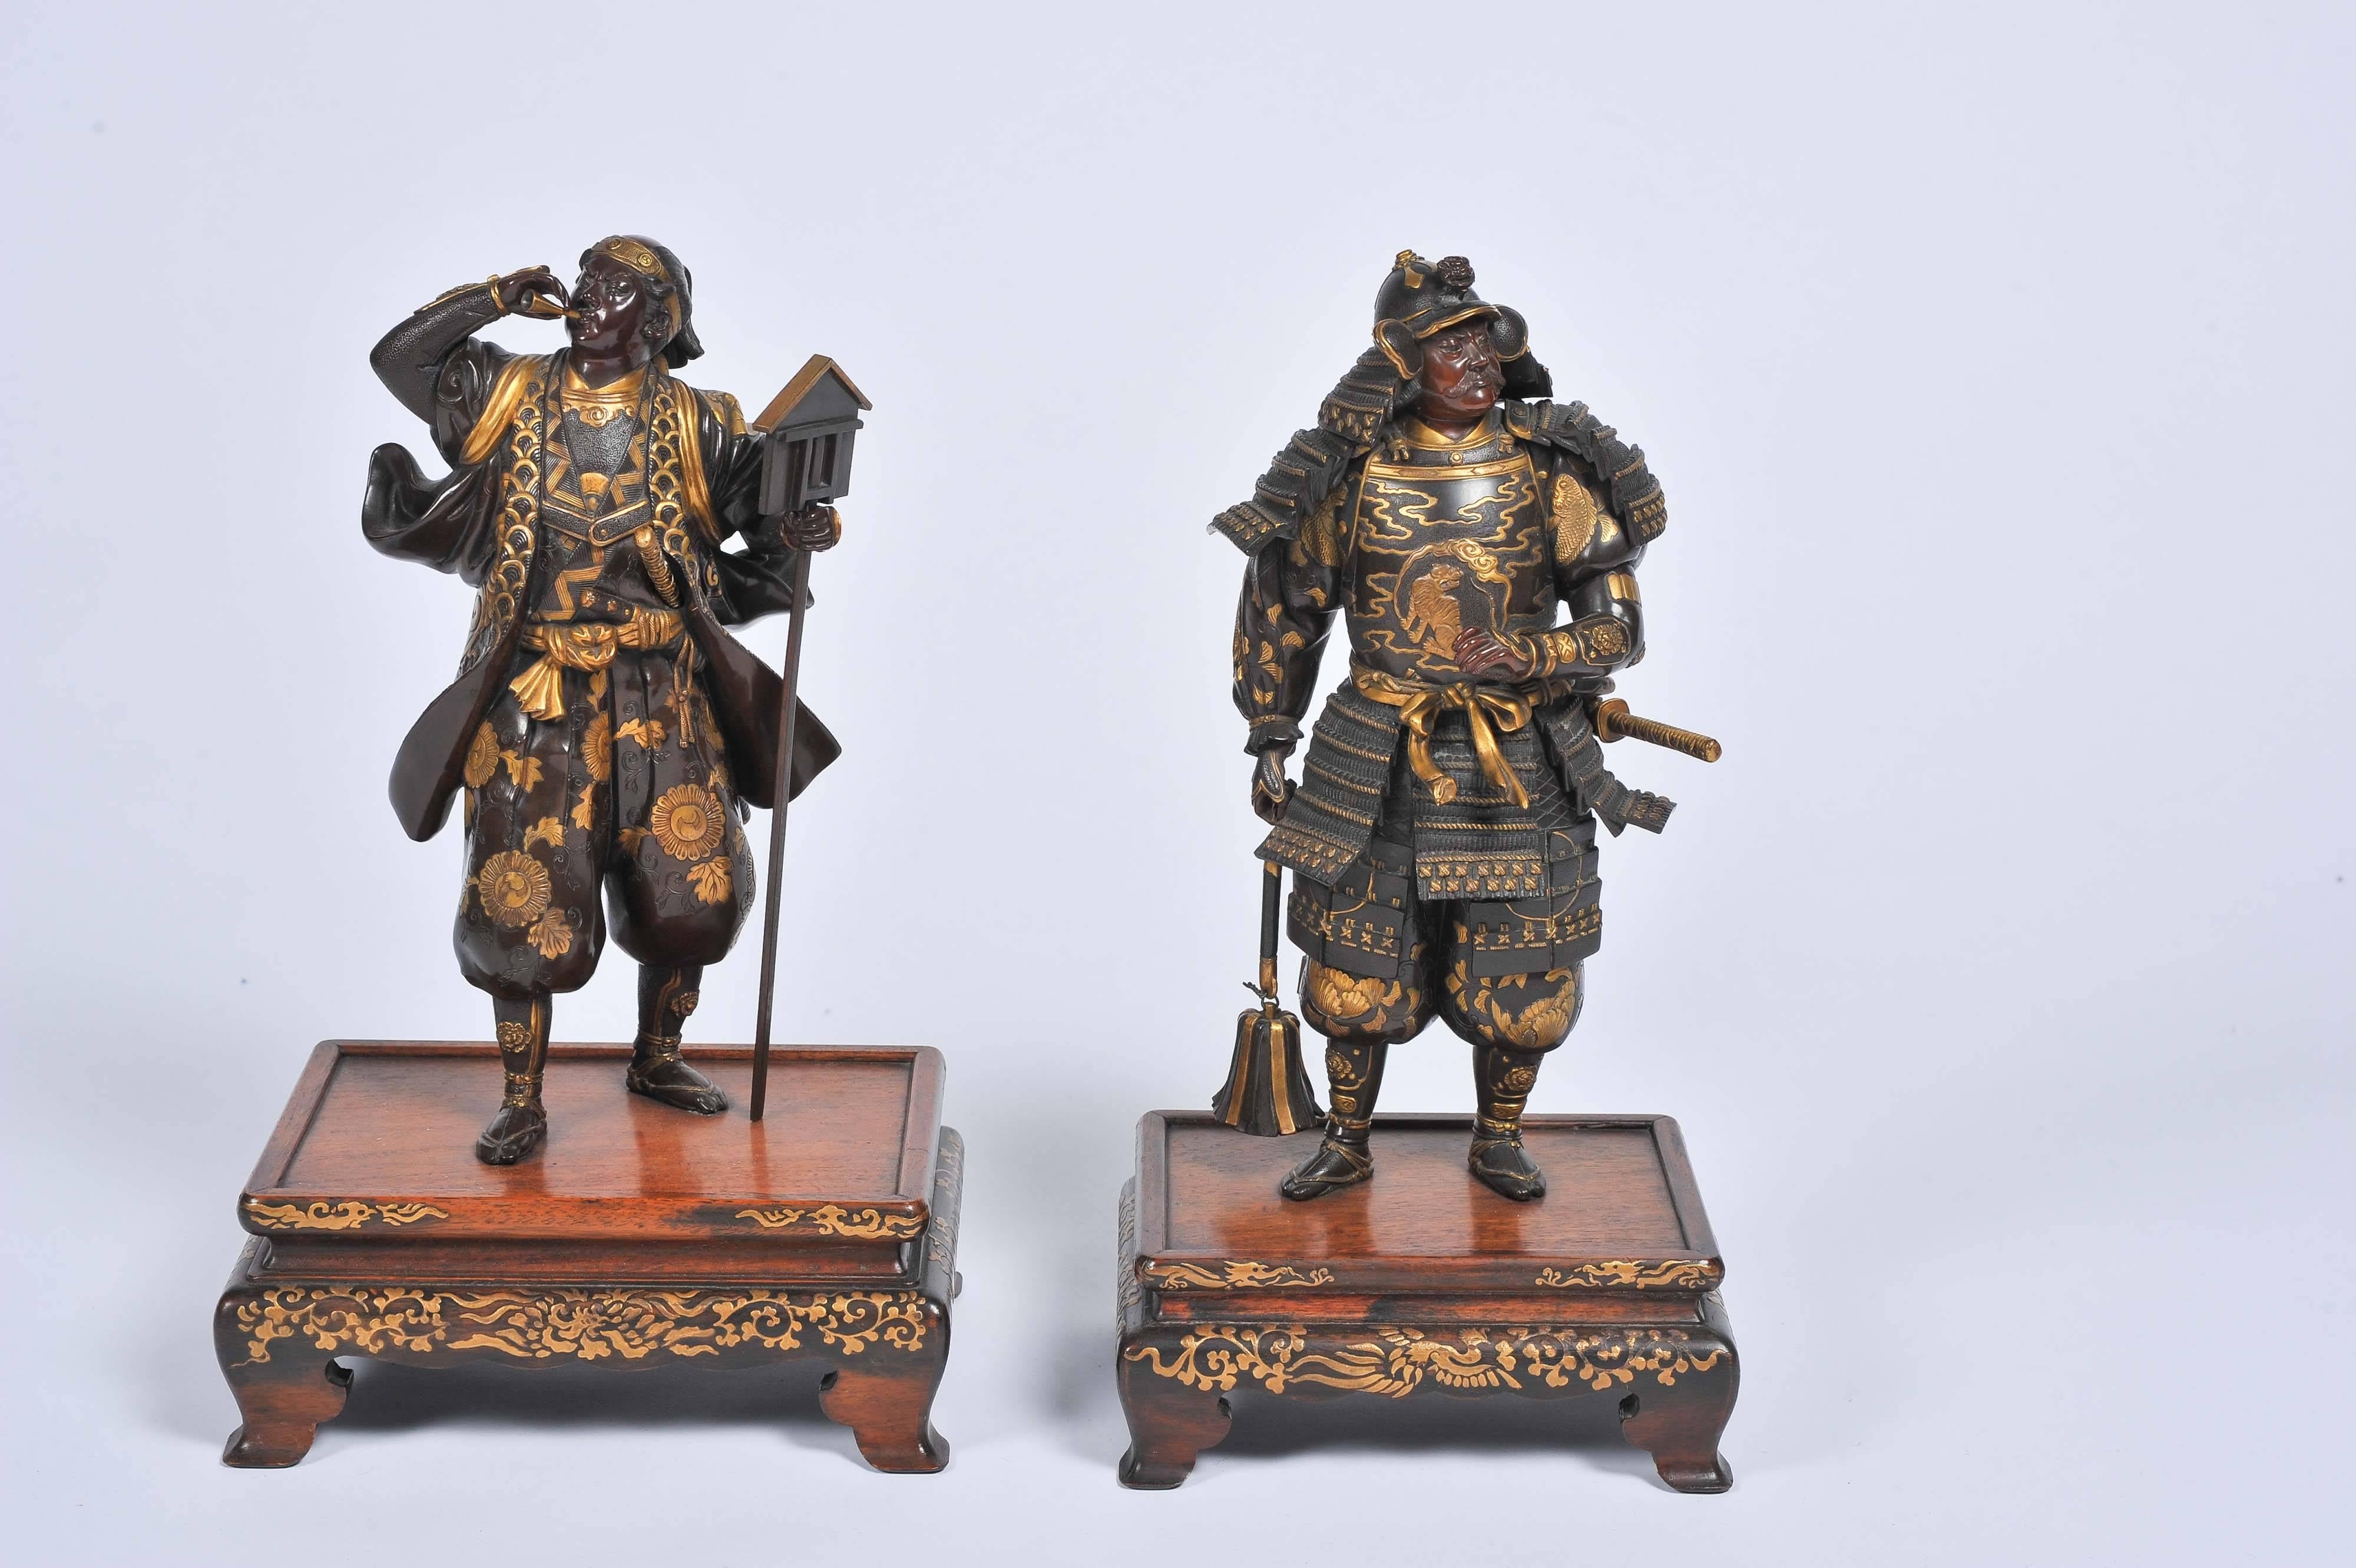 A fine quality near pair of Japanese Meiji period bronze Samurai warriors, having gilded relief decoration and mounted on hardwood stands.